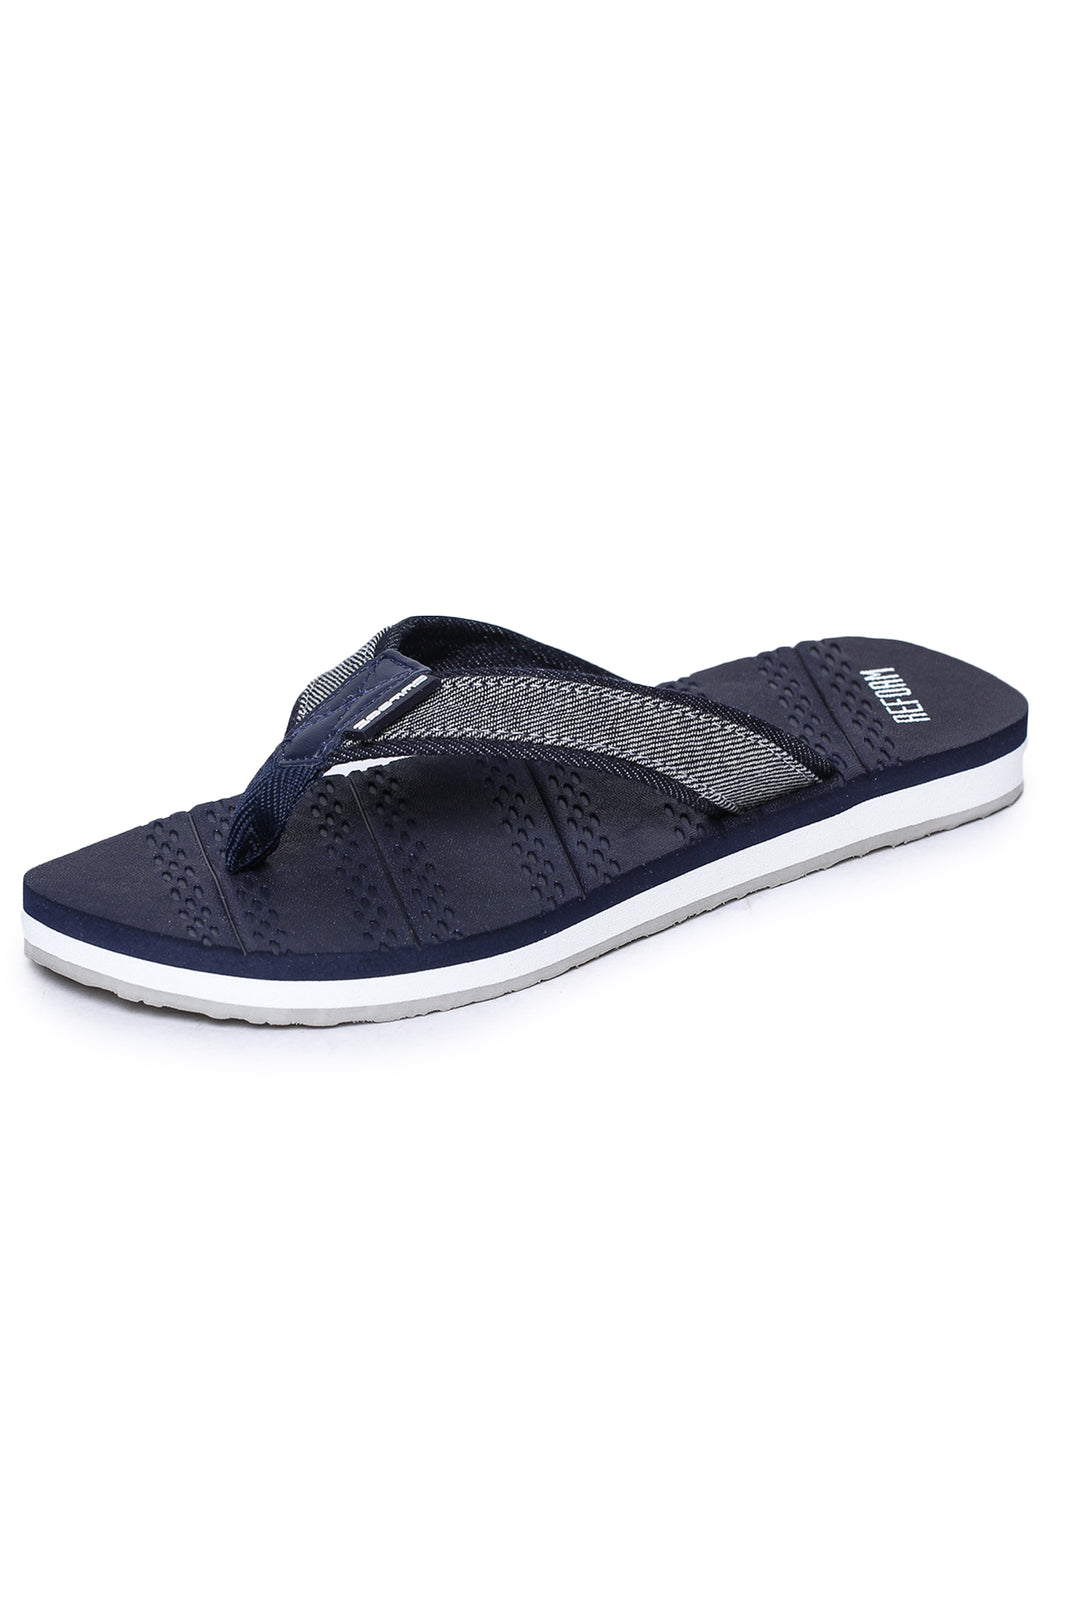 Navy Blue Solid Fabric Slip On Casual Slippers For Men